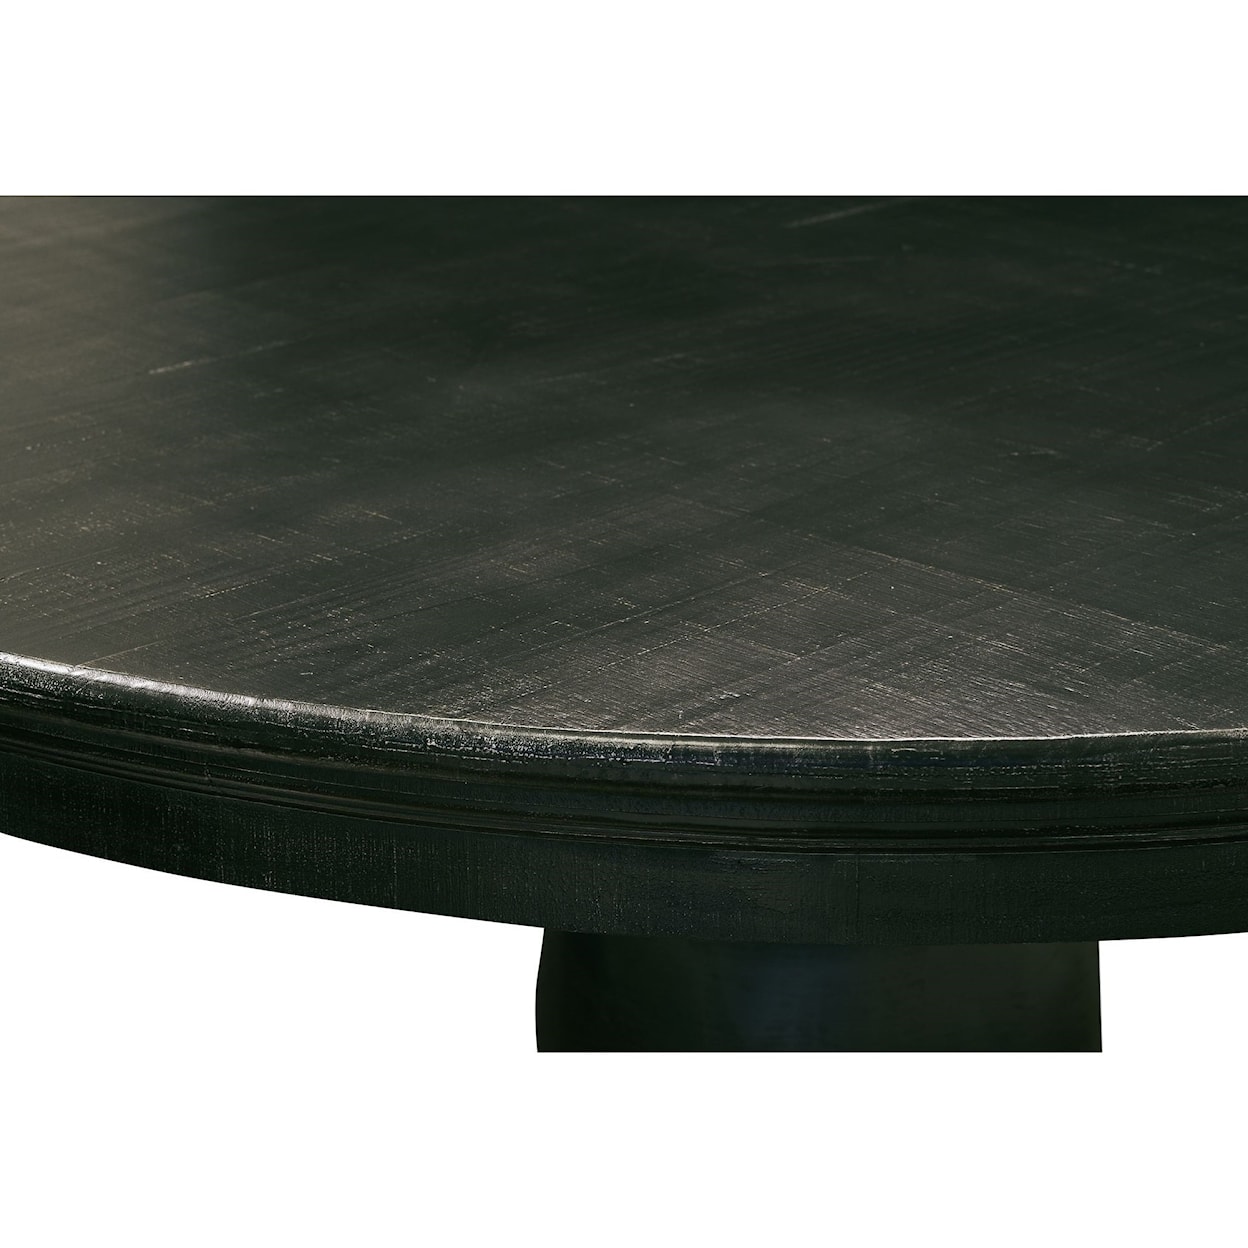 Elements Britton Dining Table